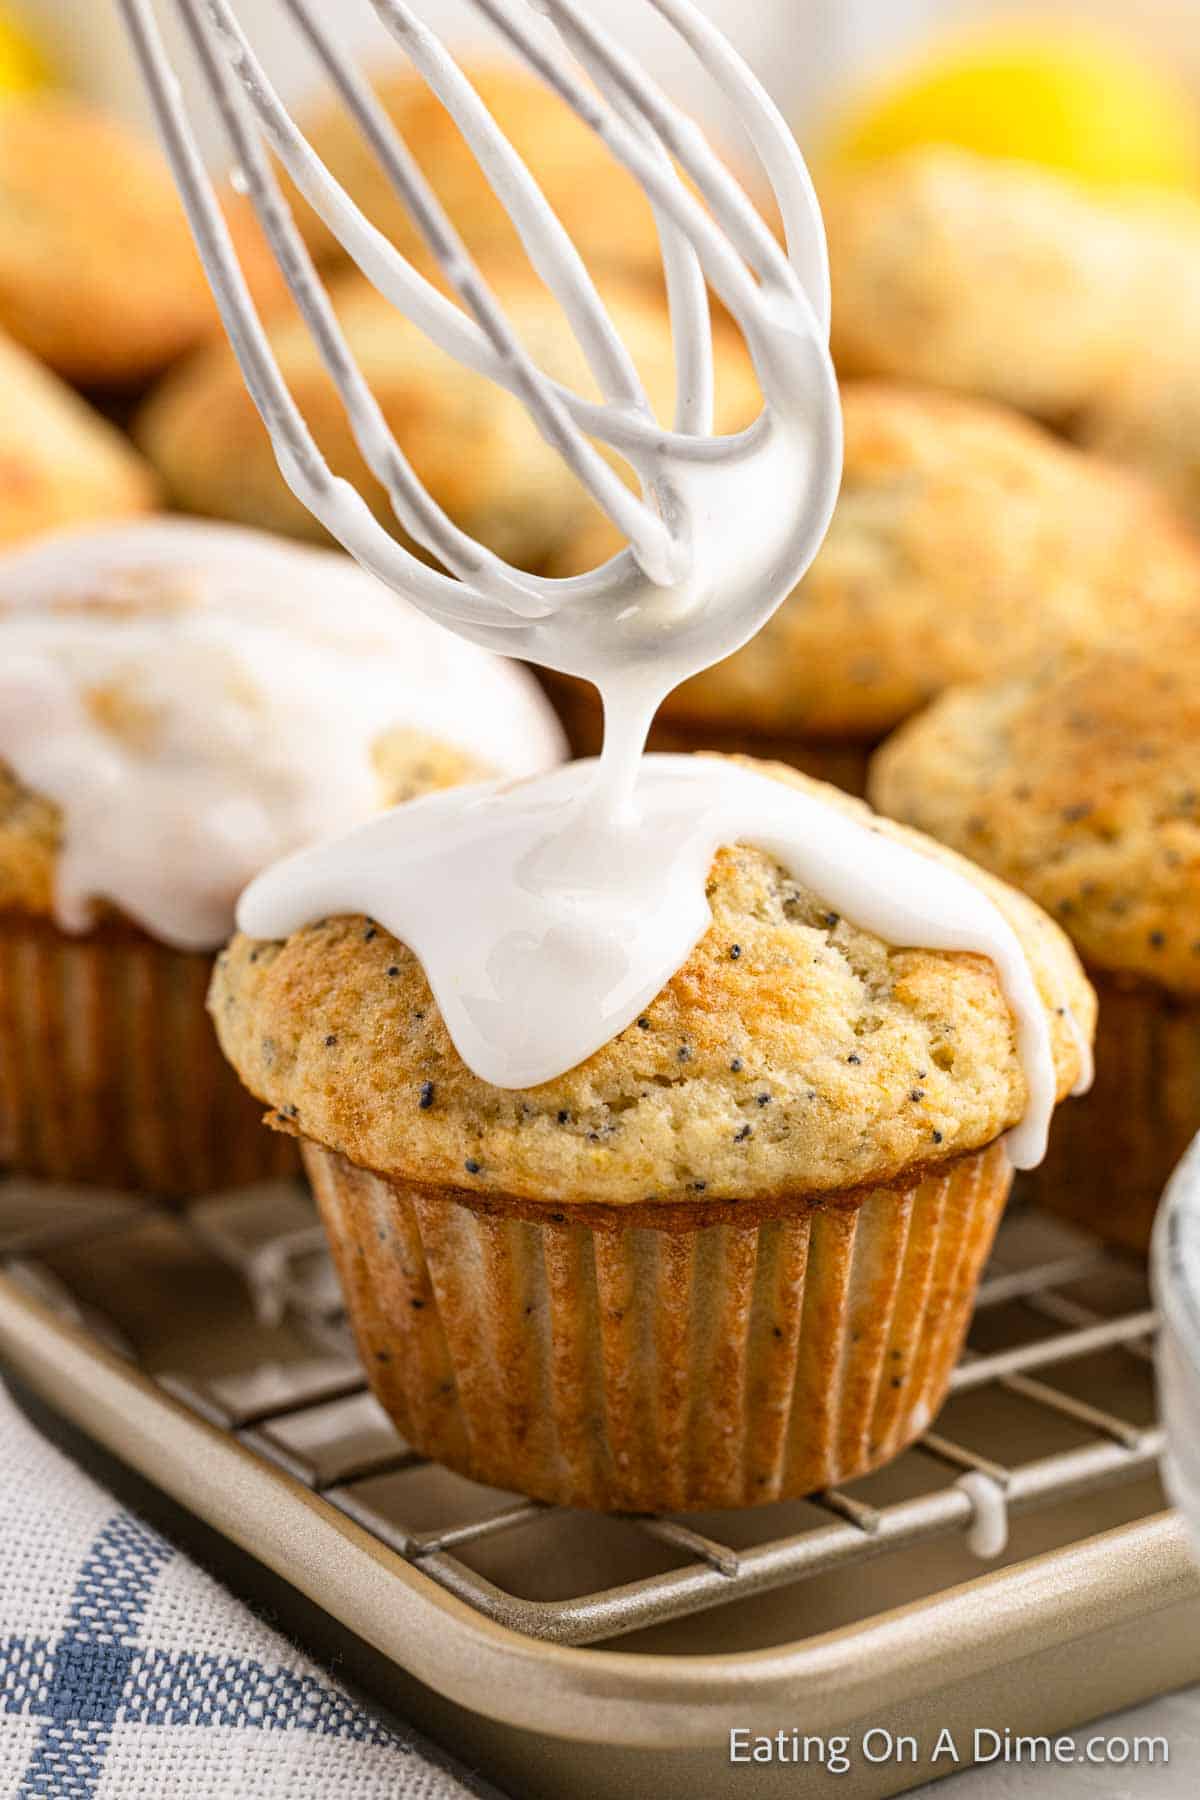 Glaze being drizzled over the topped of a baked muffin